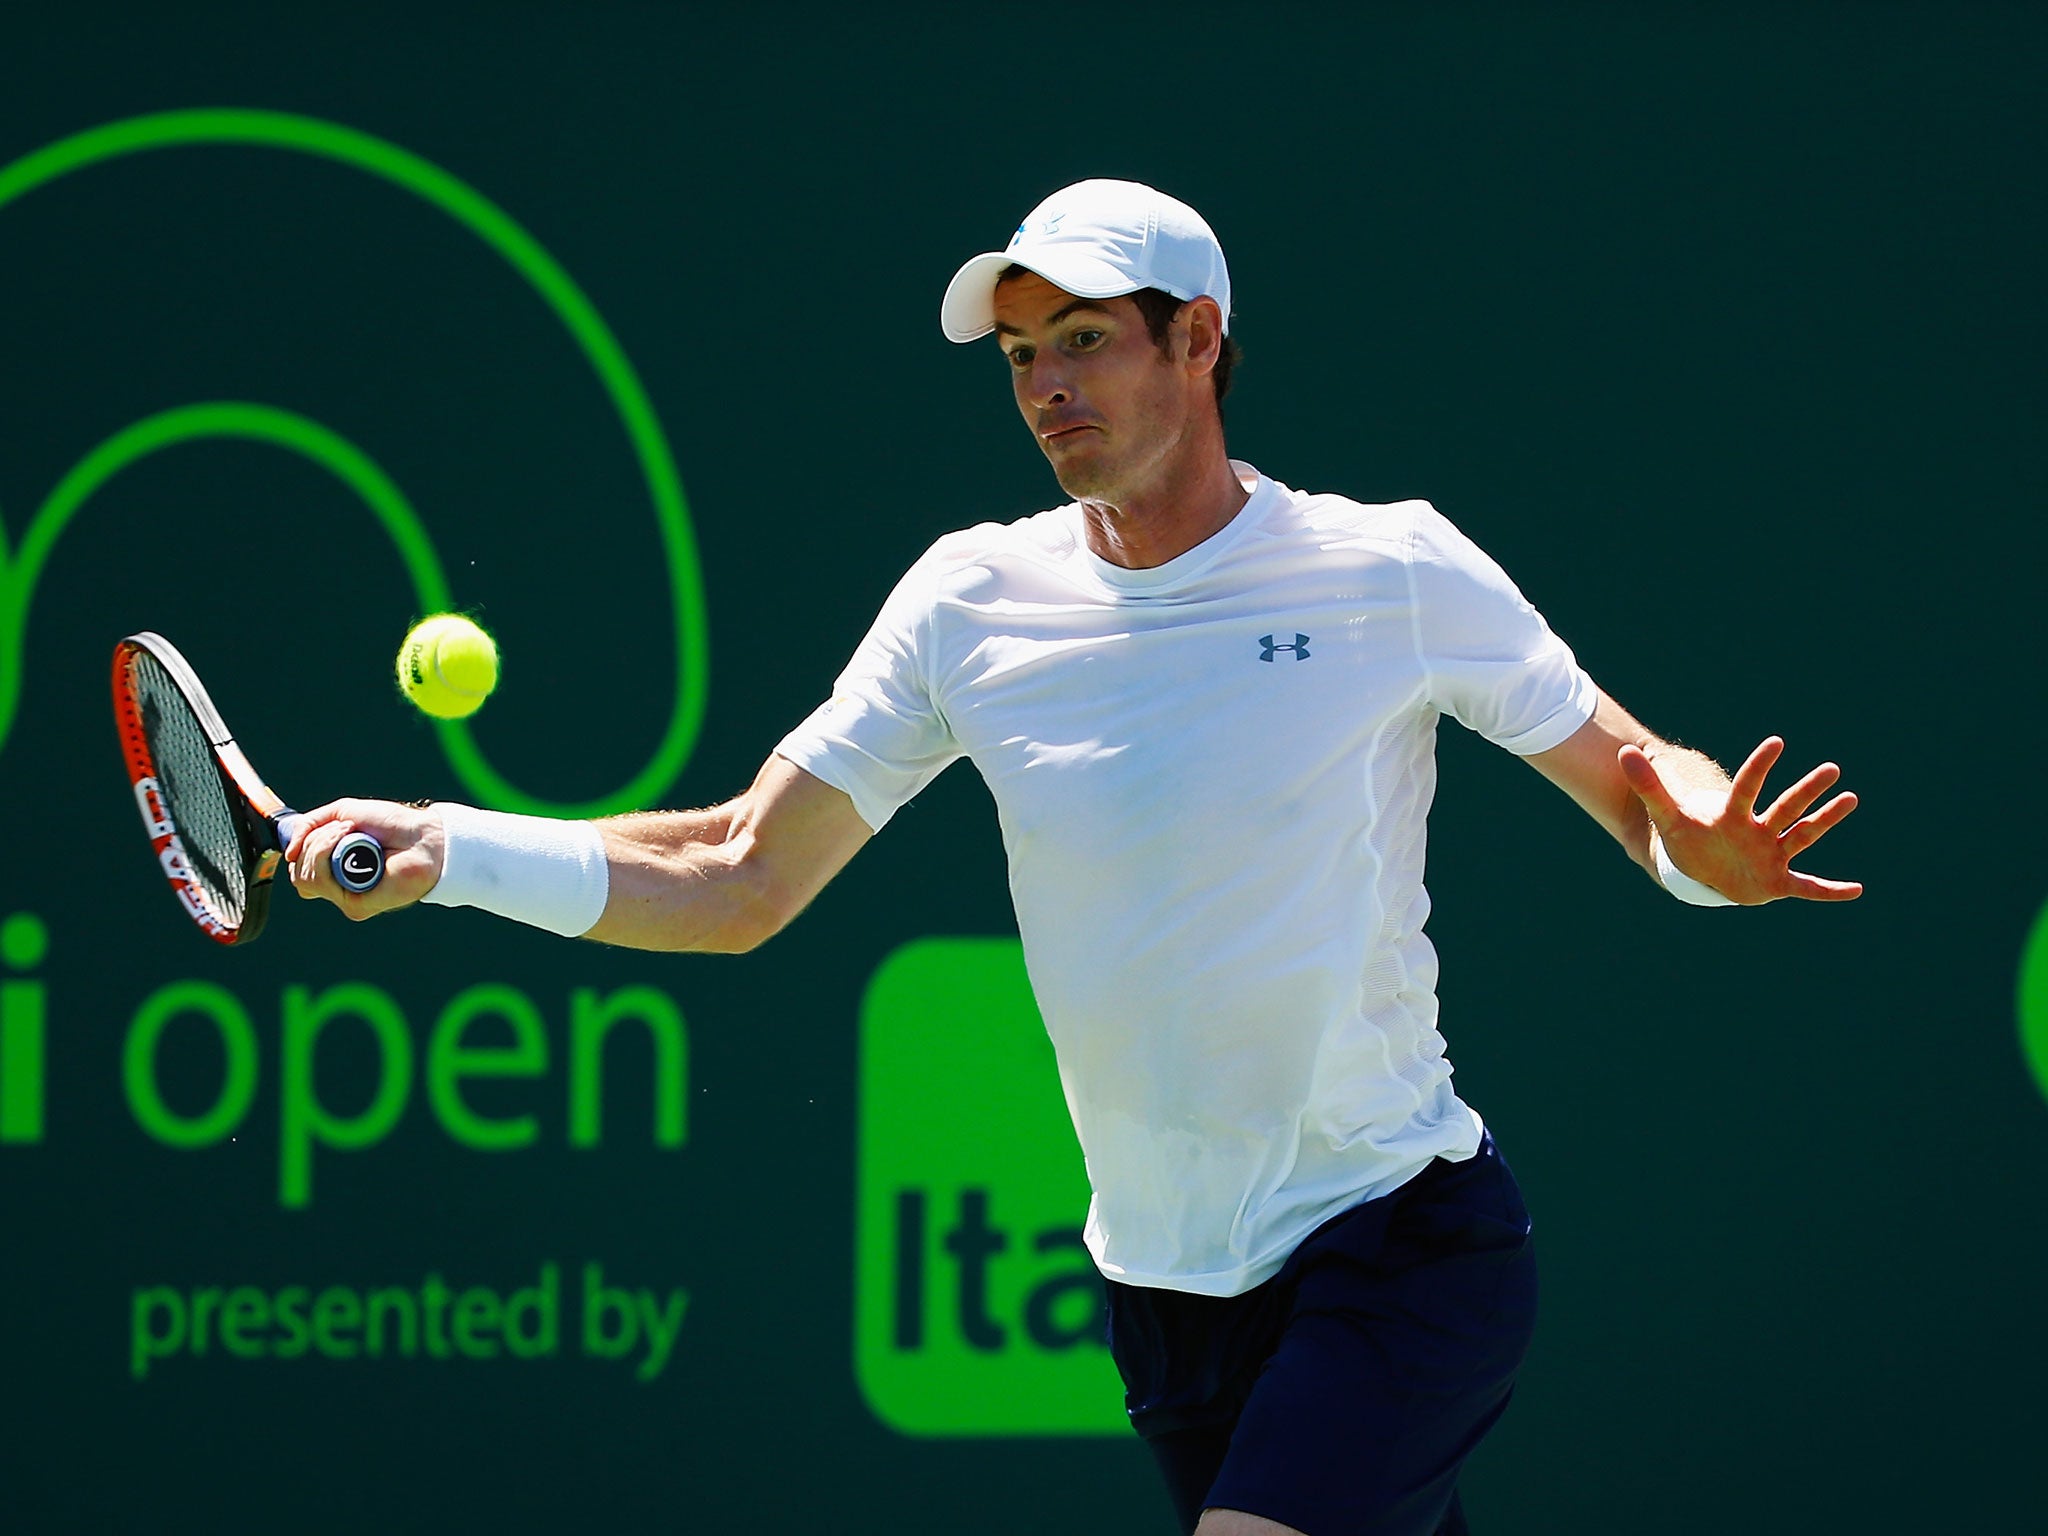 Andy Murray makes a forehand return during his win over Santiago Giraldo